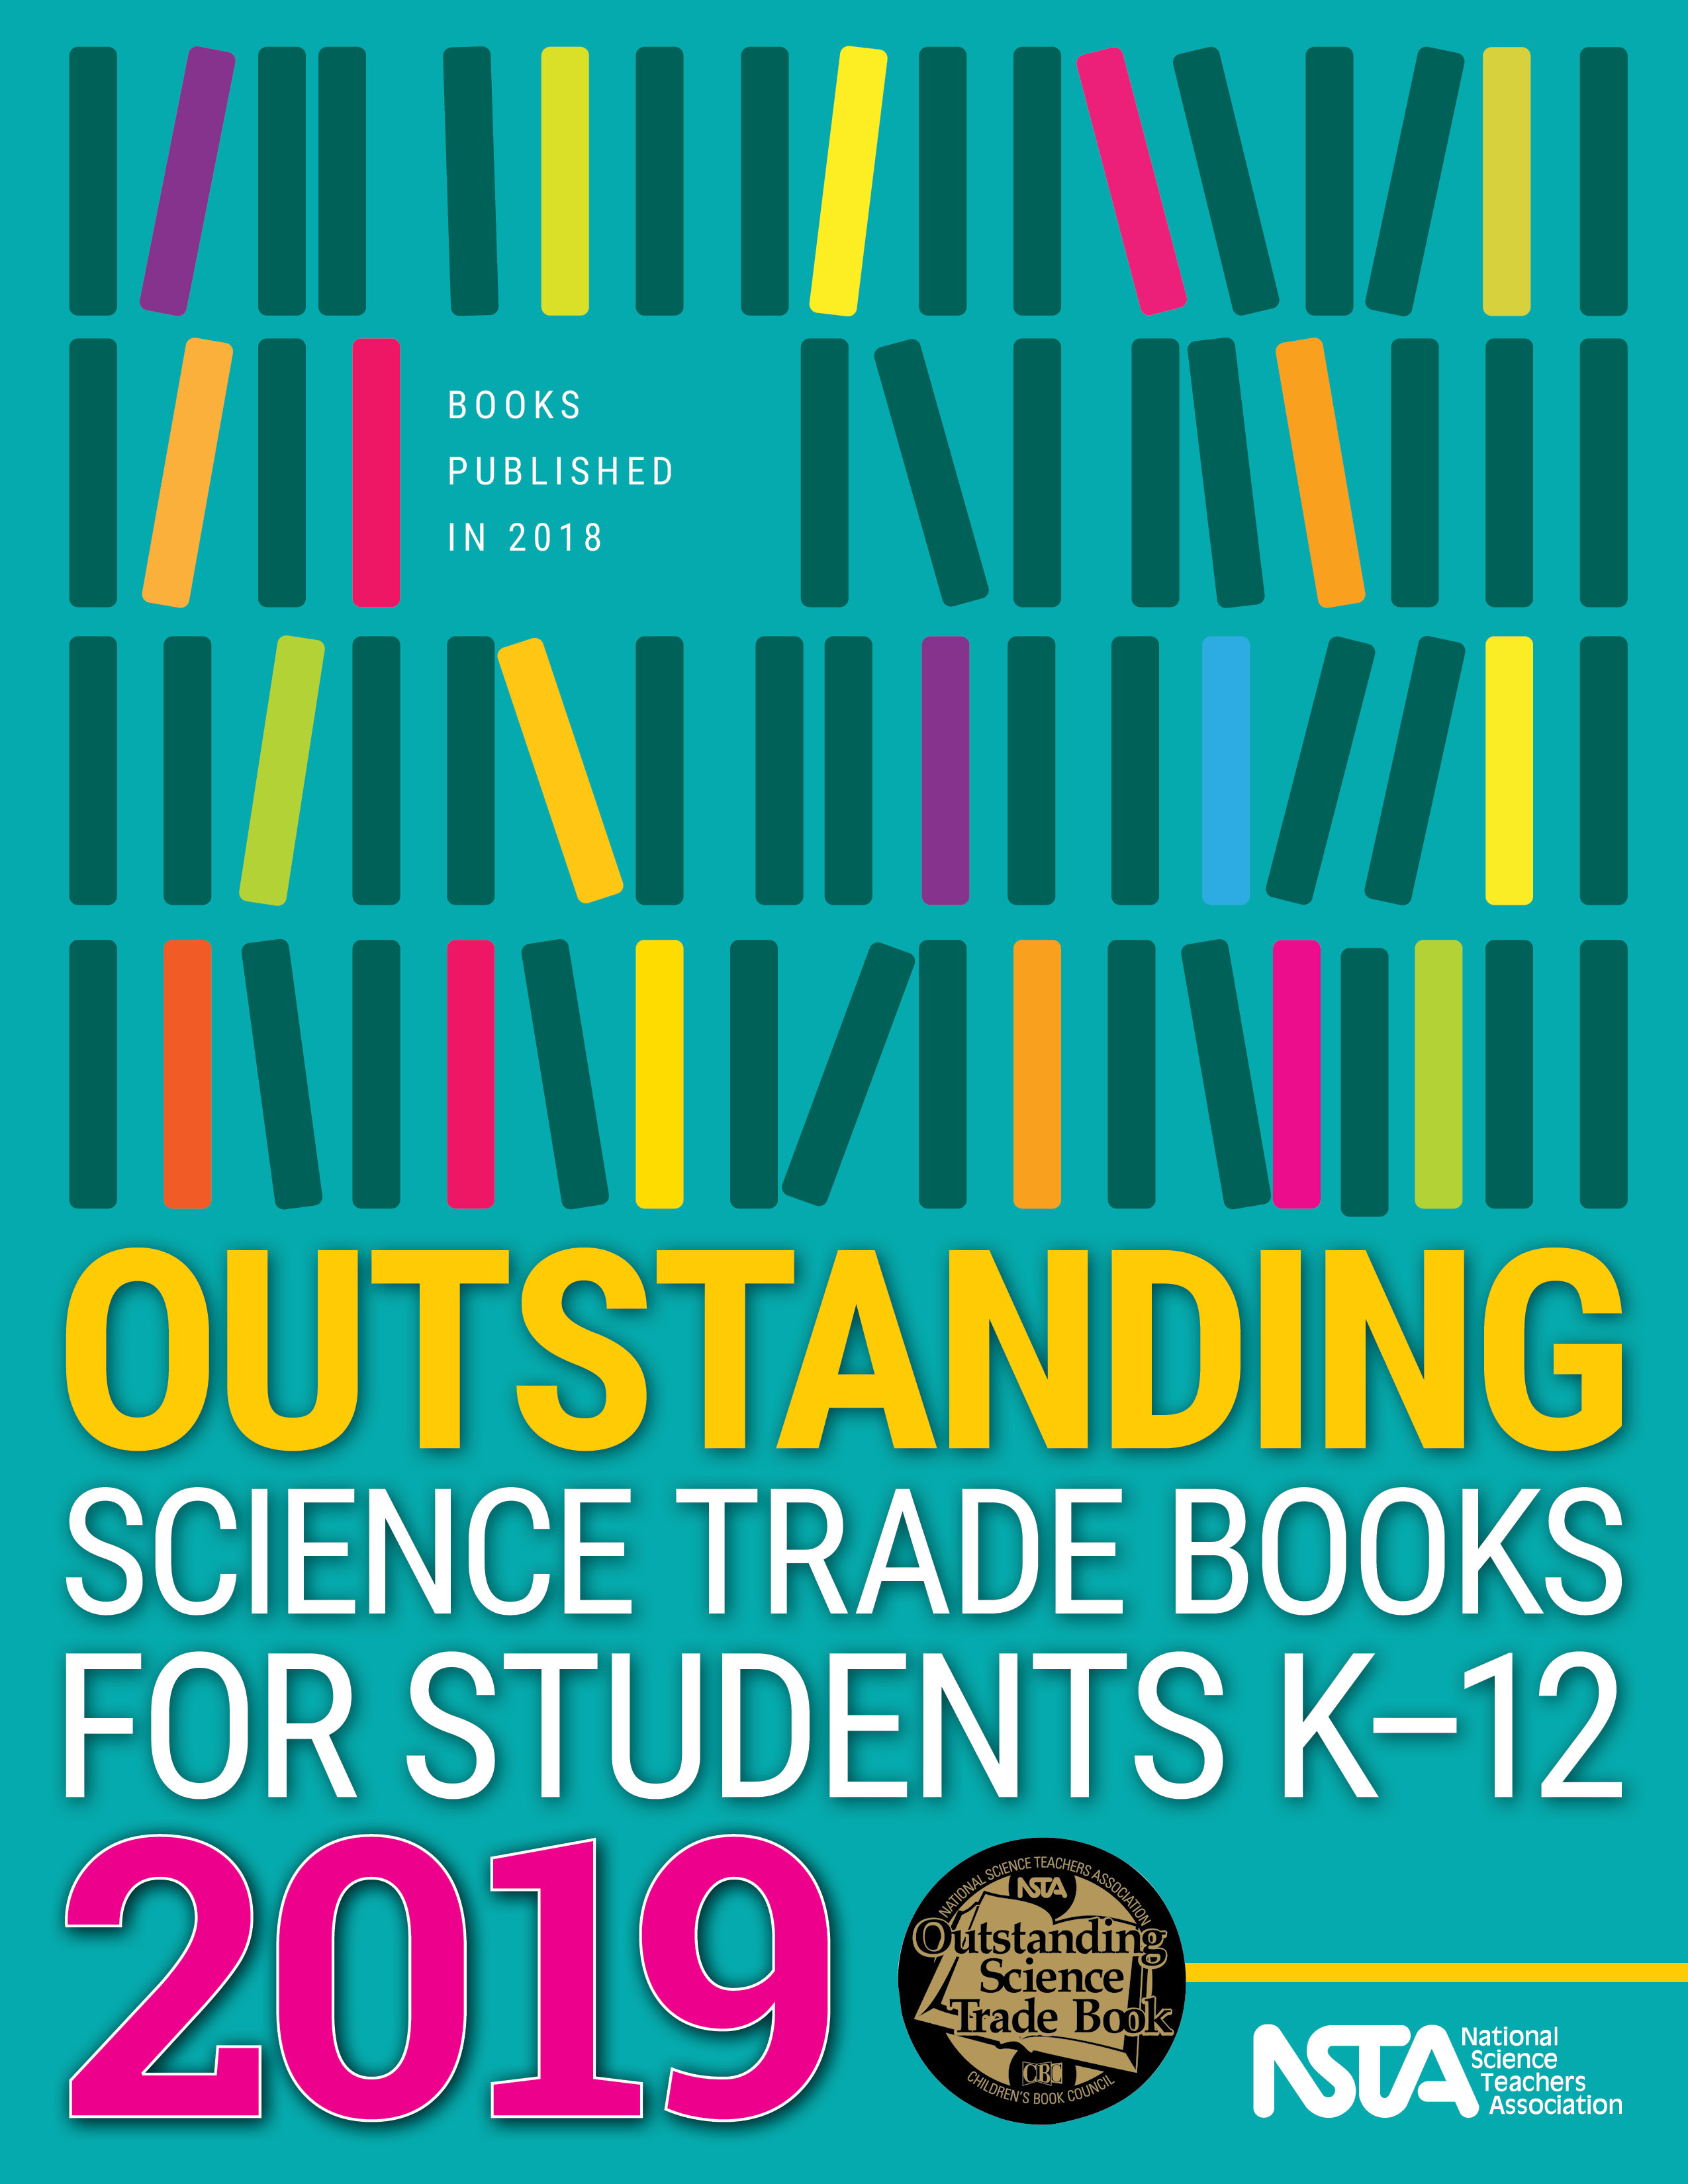 Nsta Unveils 19 List Of Top Science Trade Books For K 12 Students Business Wire